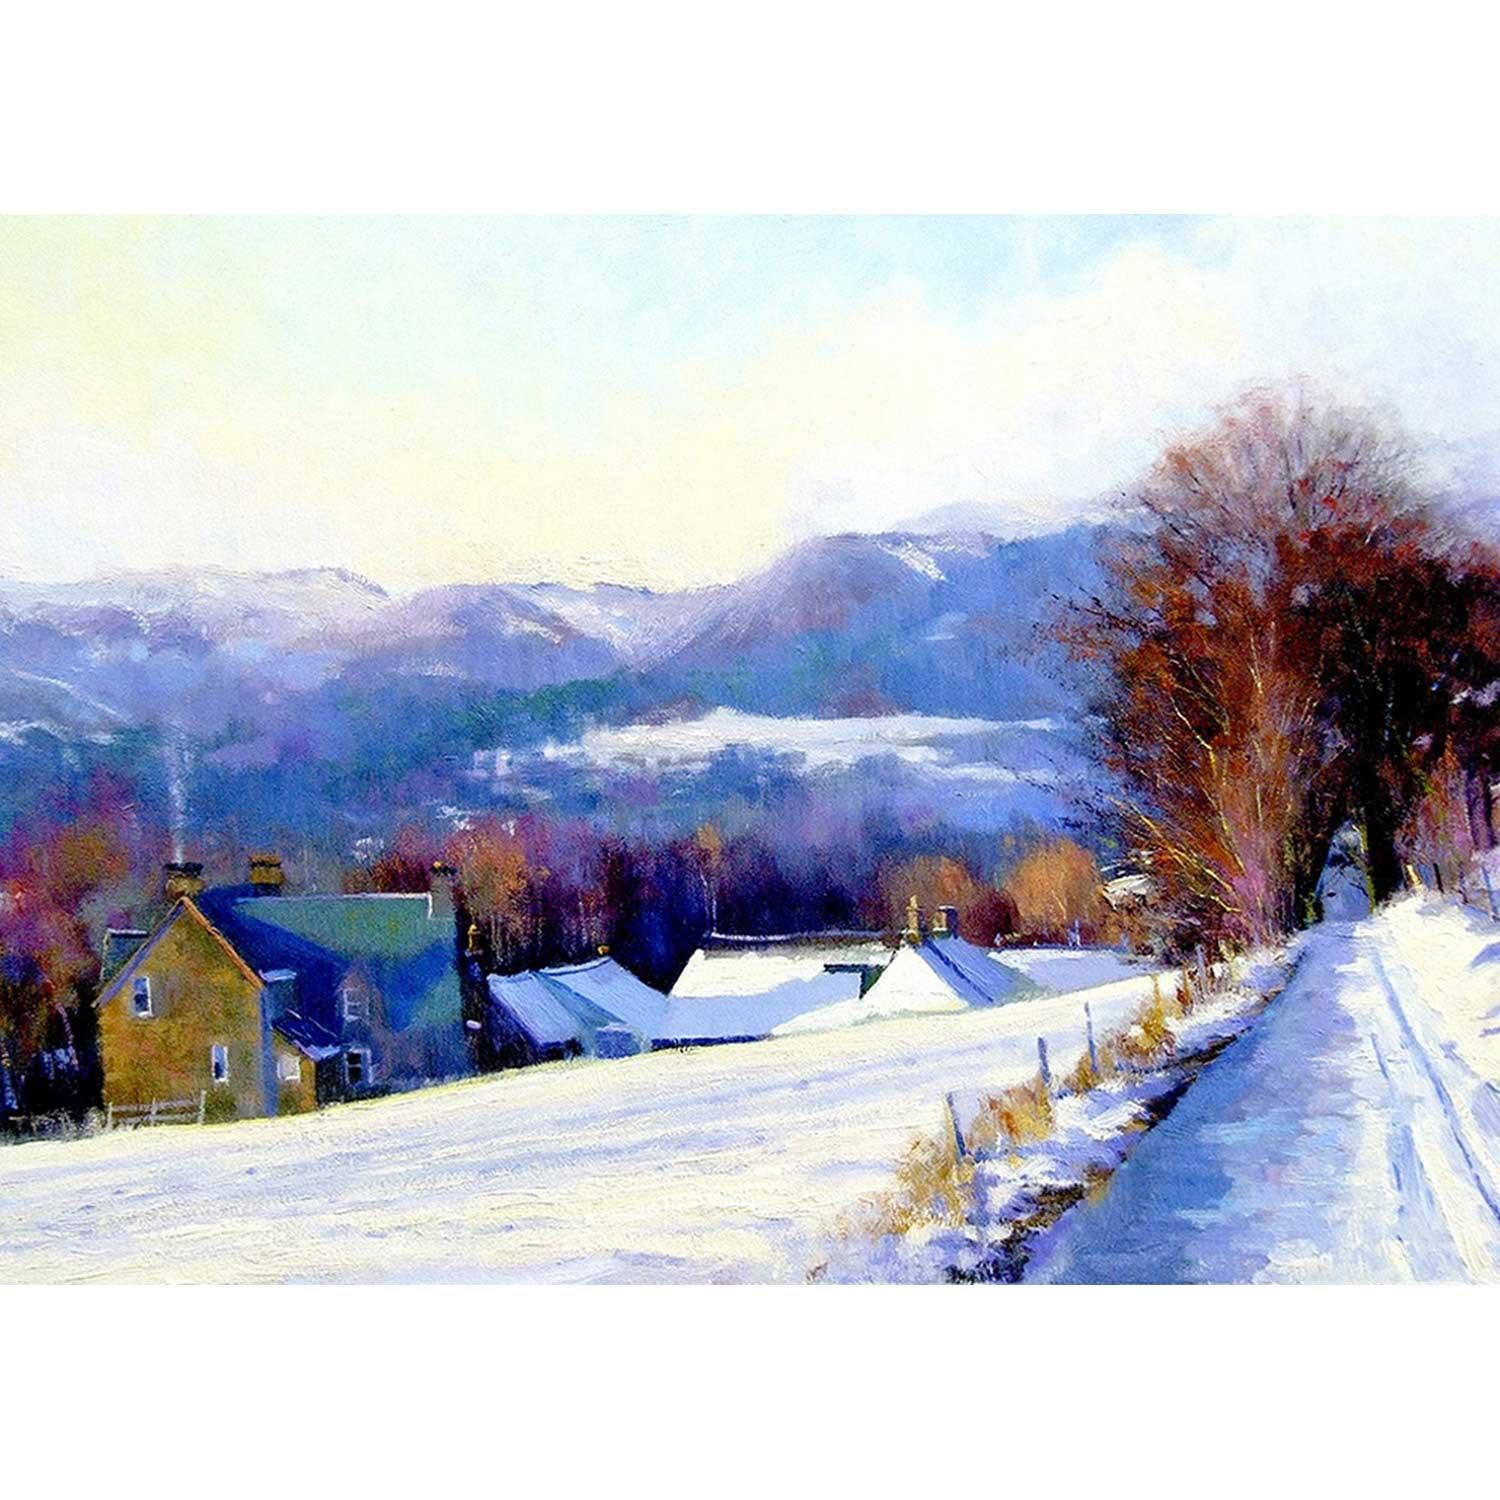 Winter Sun, Pitlochry by Colin Robertson